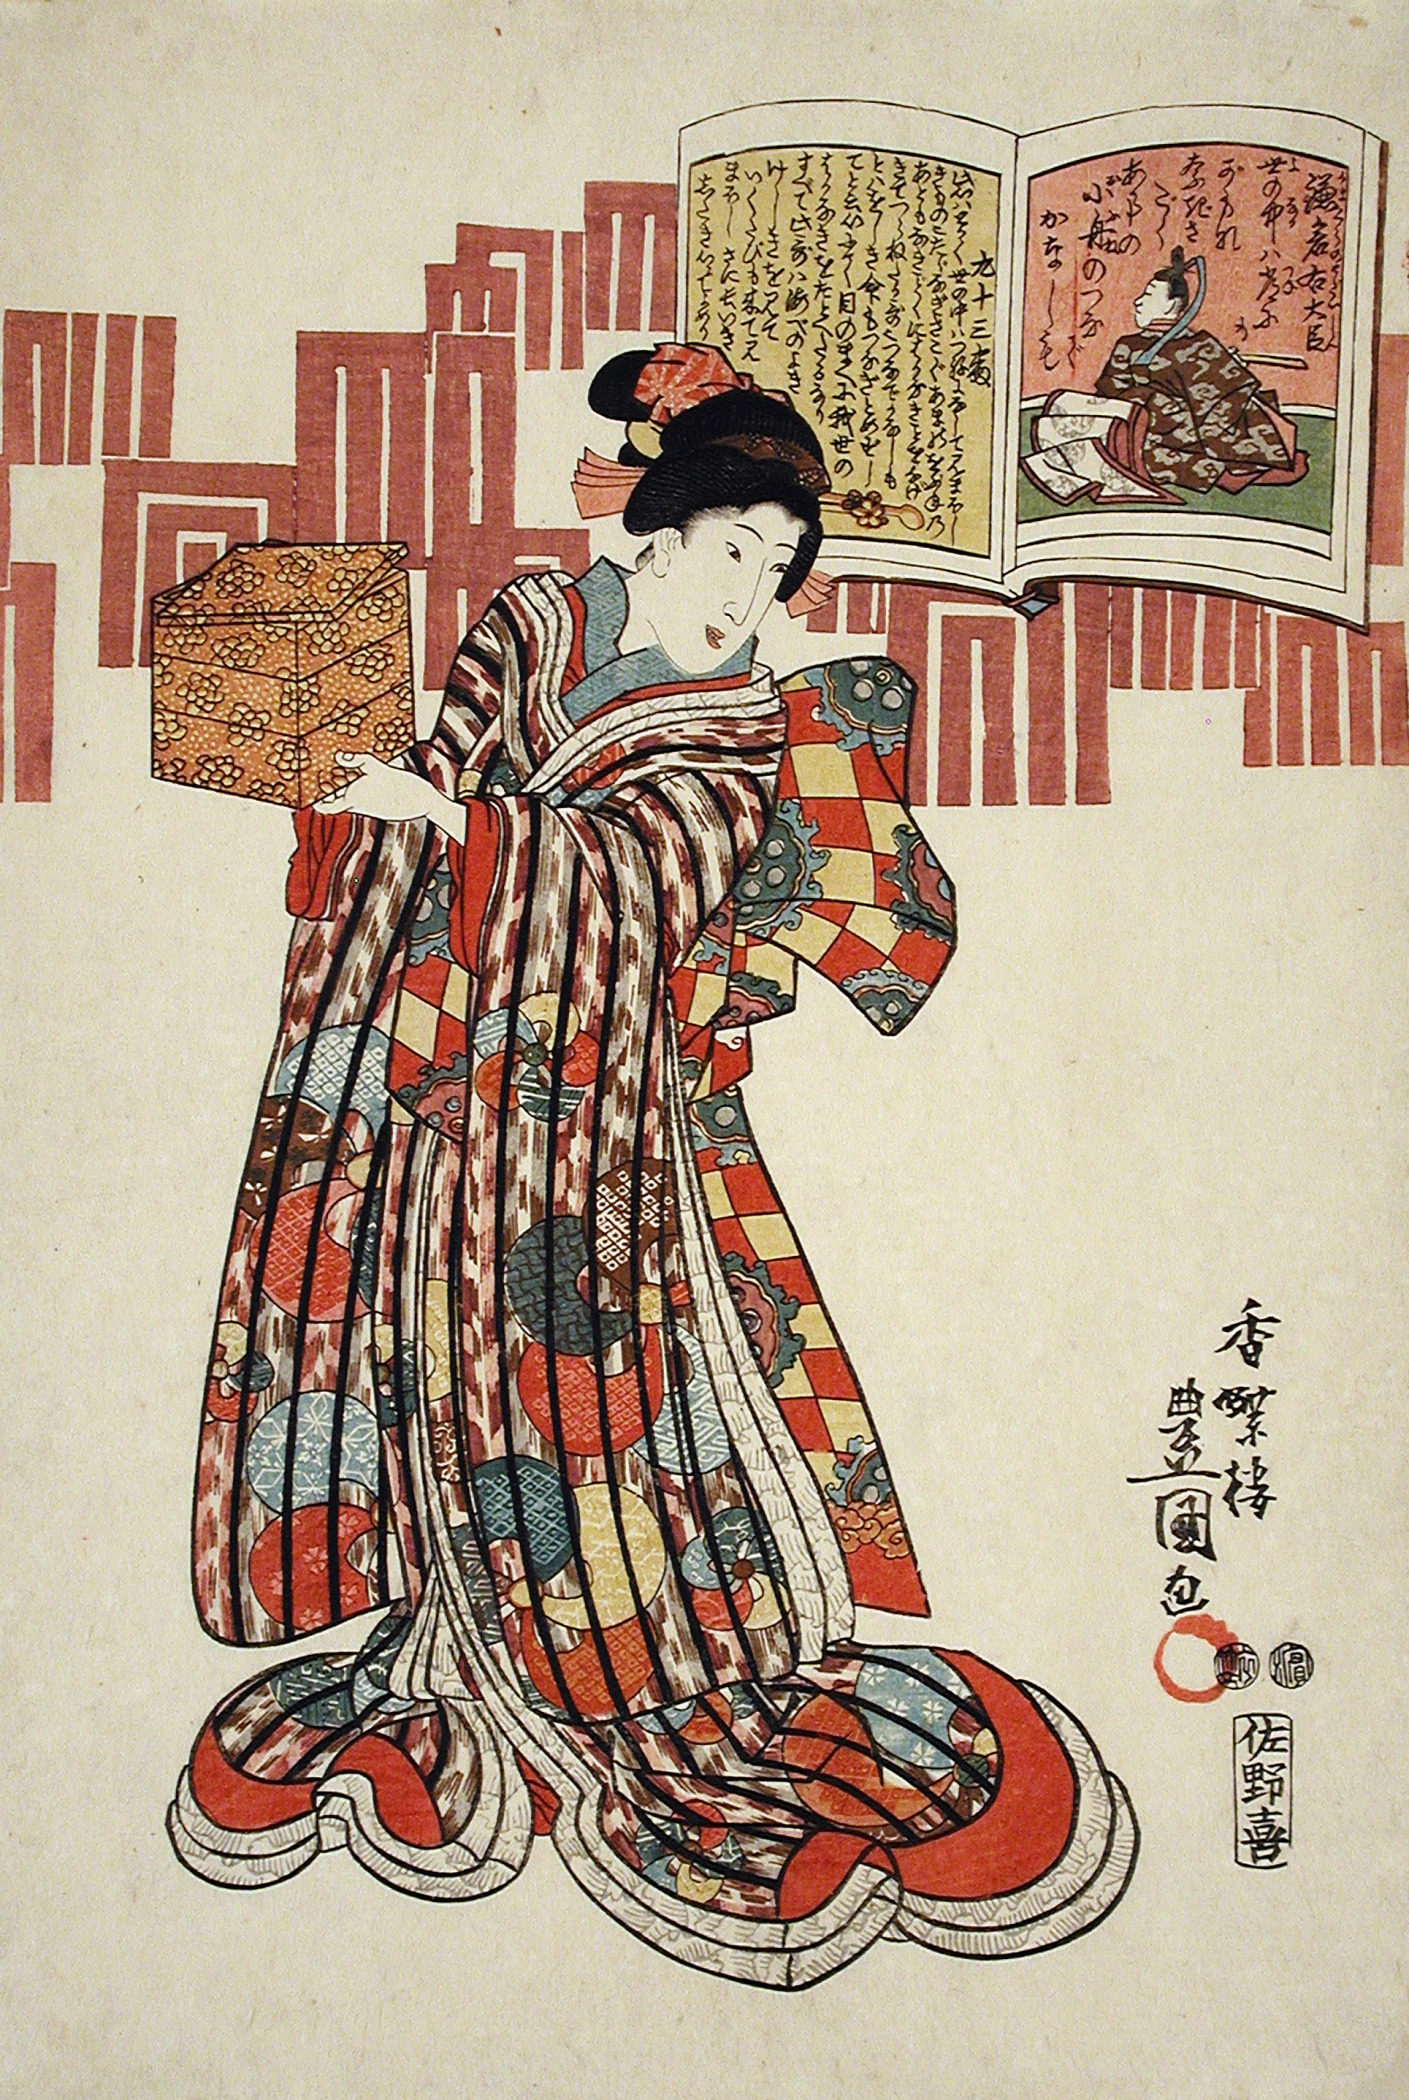 an asian artwork showing a woman holding a large object